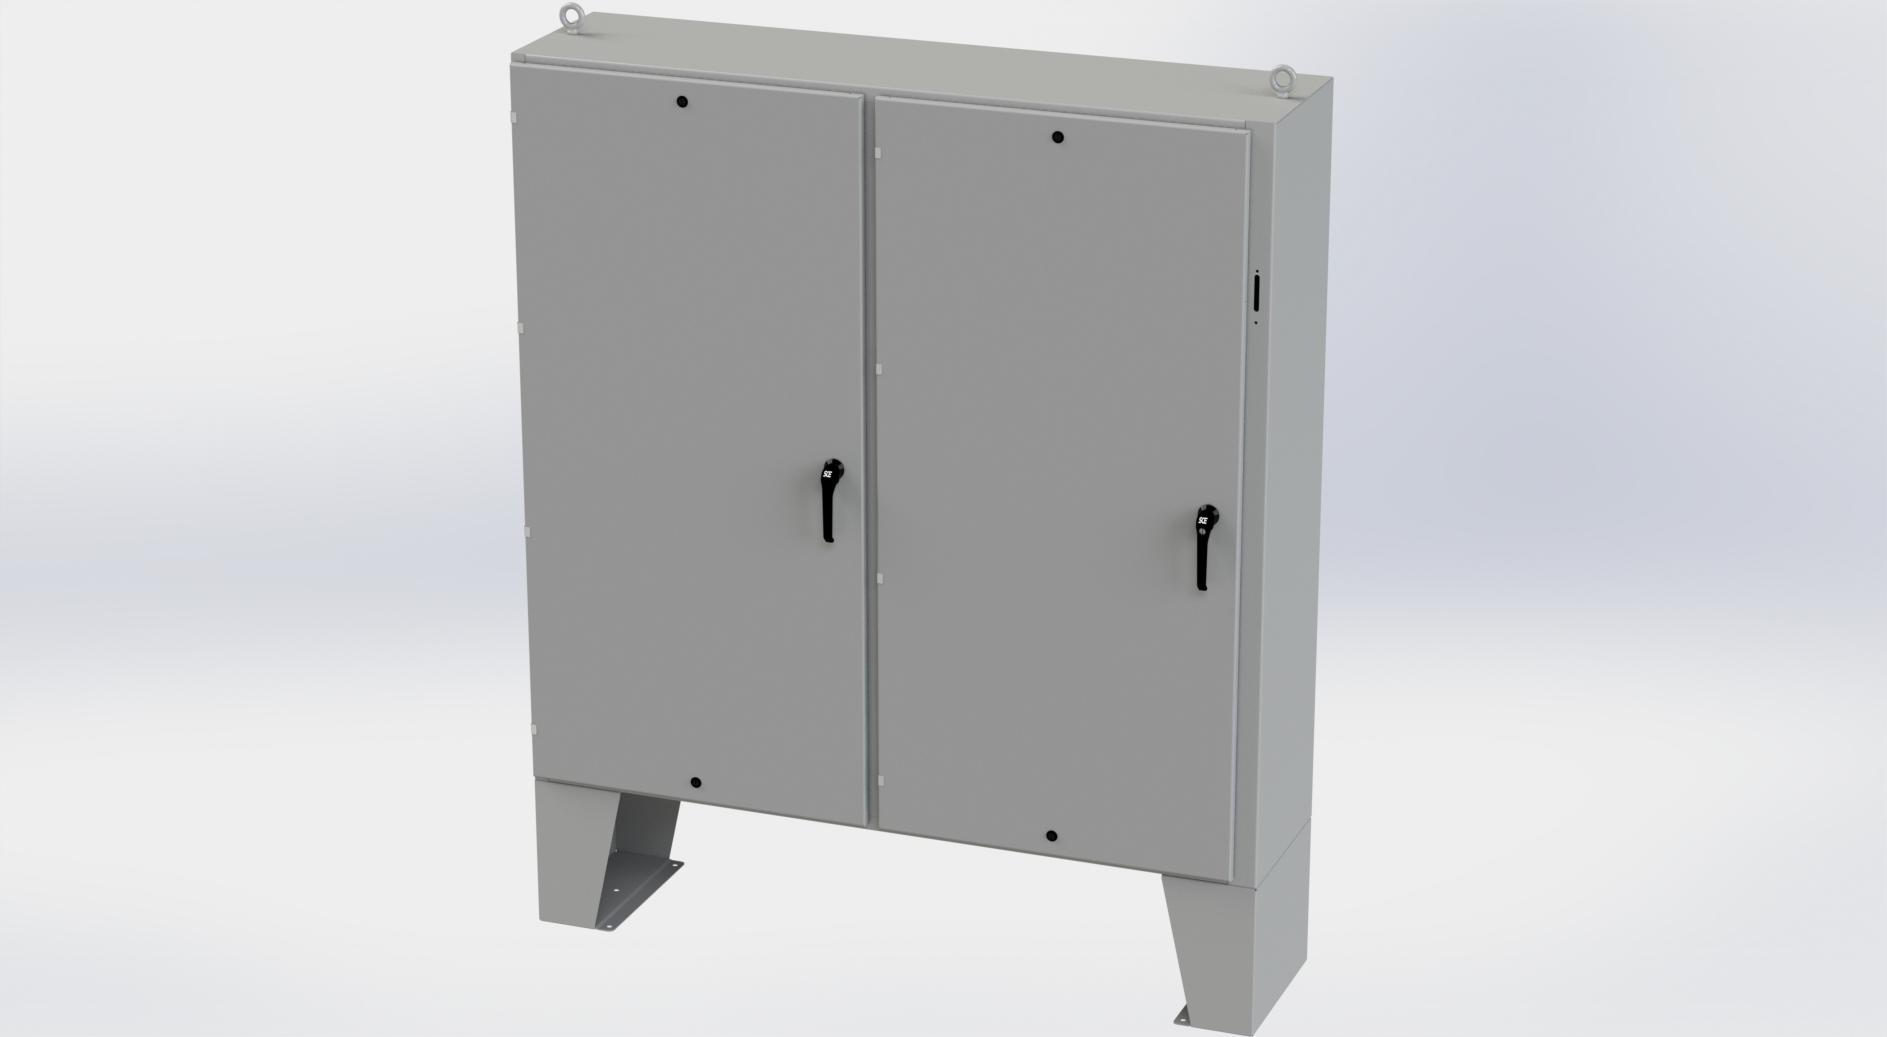 Saginaw Control SCE-72XEL7318LP 2DR XEL Enclosure, Height:72.00", Width:73.00", Depth:18.00", ANSI-61 gray powder coating inside and out. Optional sub-panels are powder coated white.